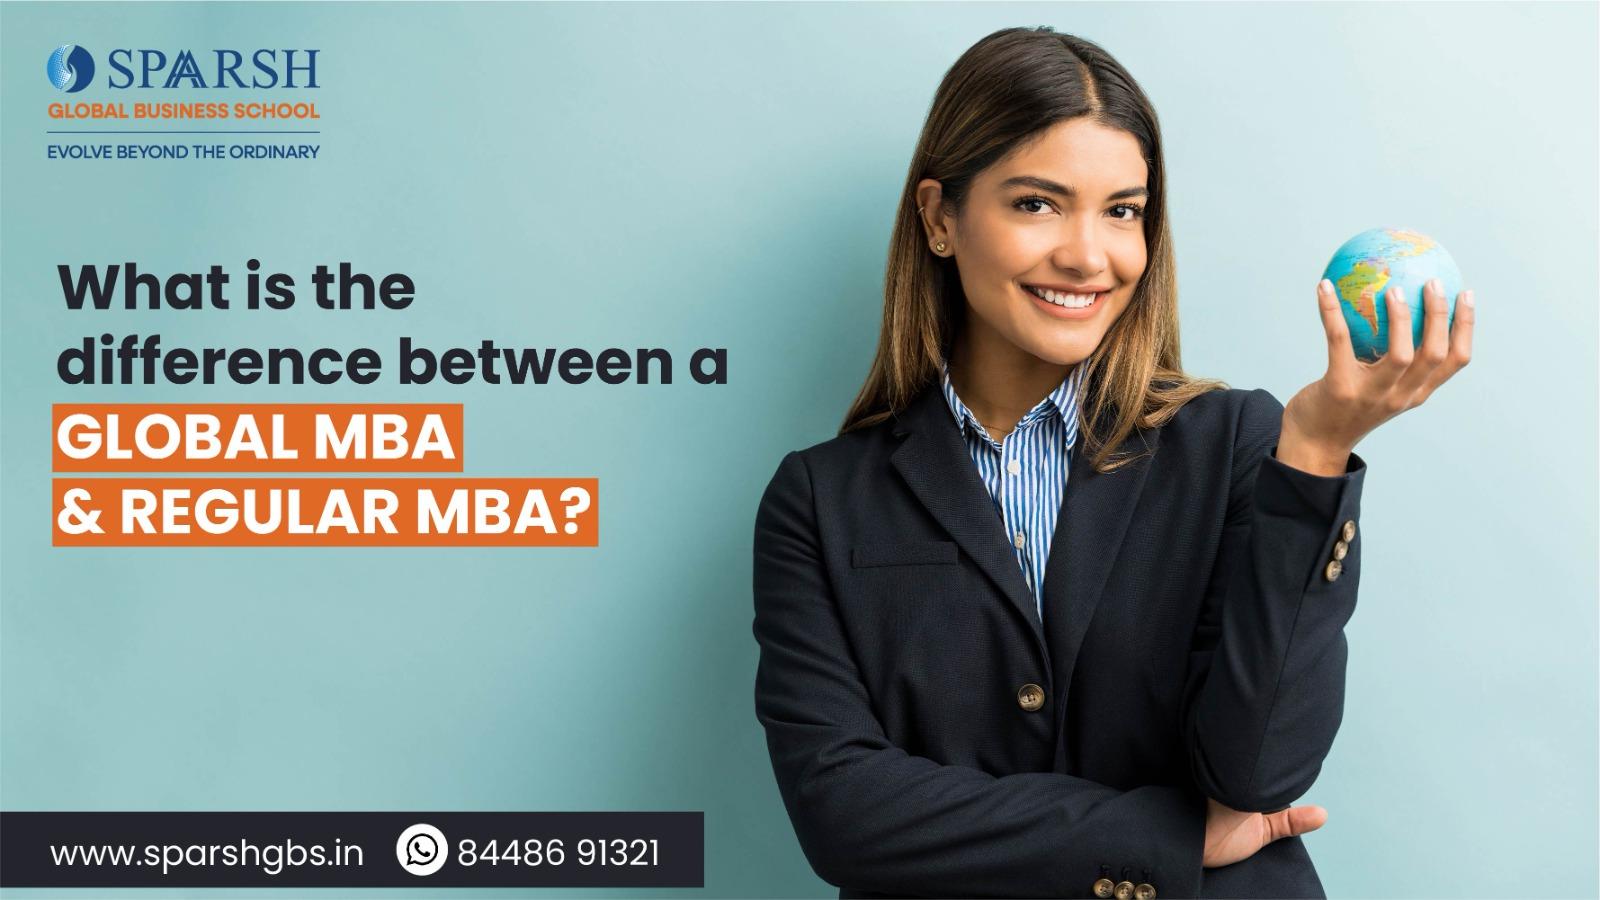 What is the Difference Between a Global MBA and a Regular MBA?